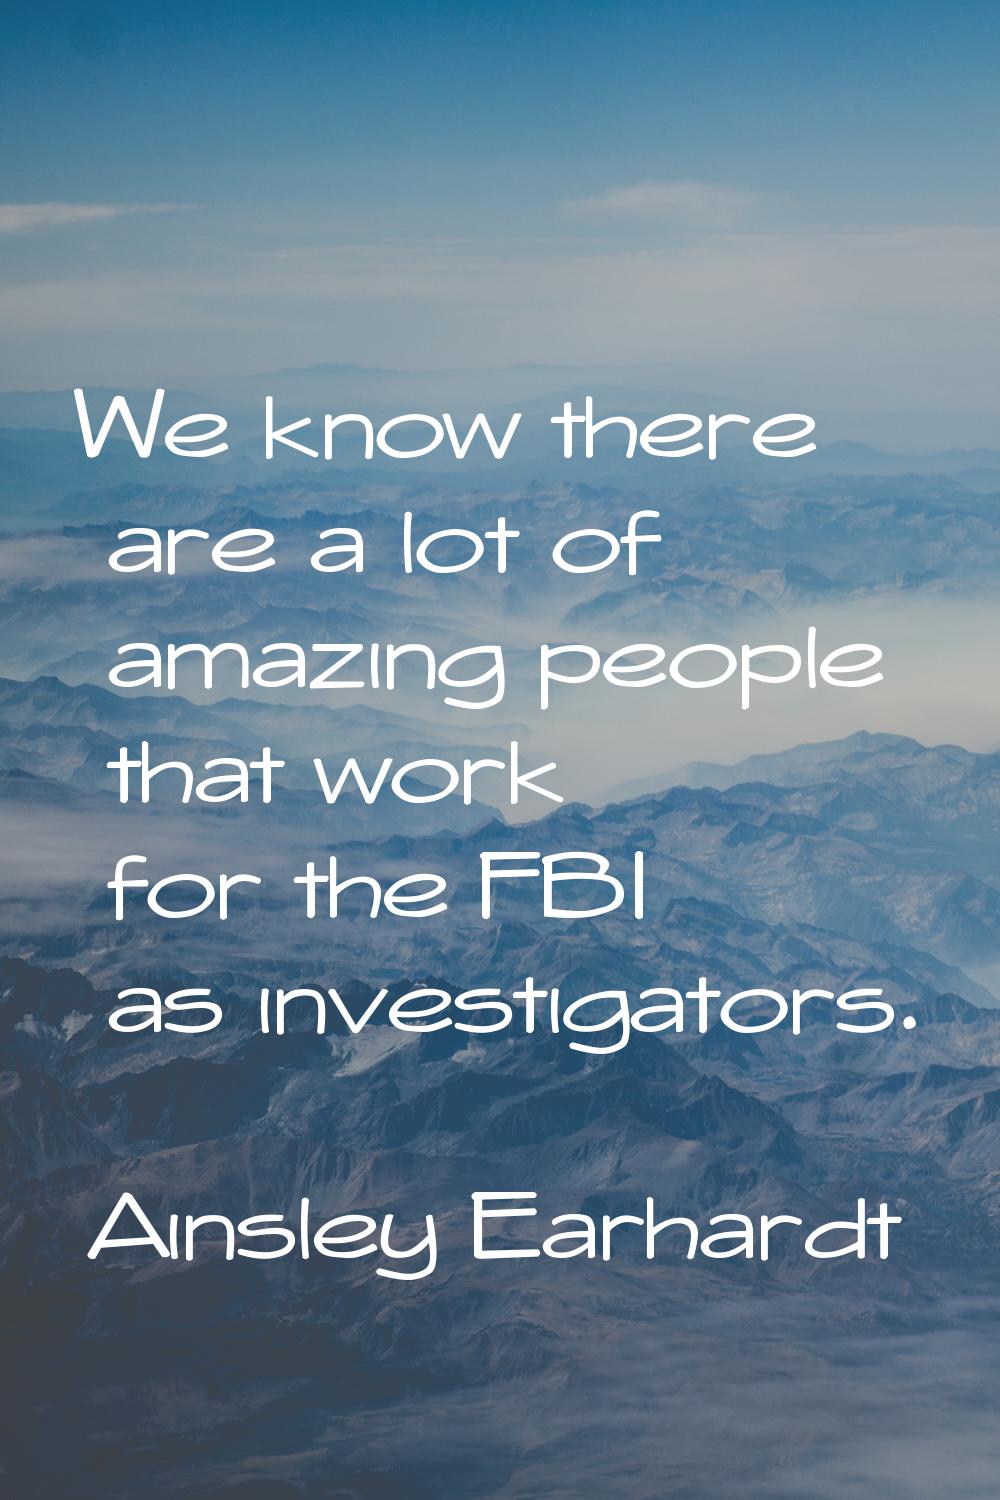 We know there are a lot of amazing people that work for the FBI as investigators.